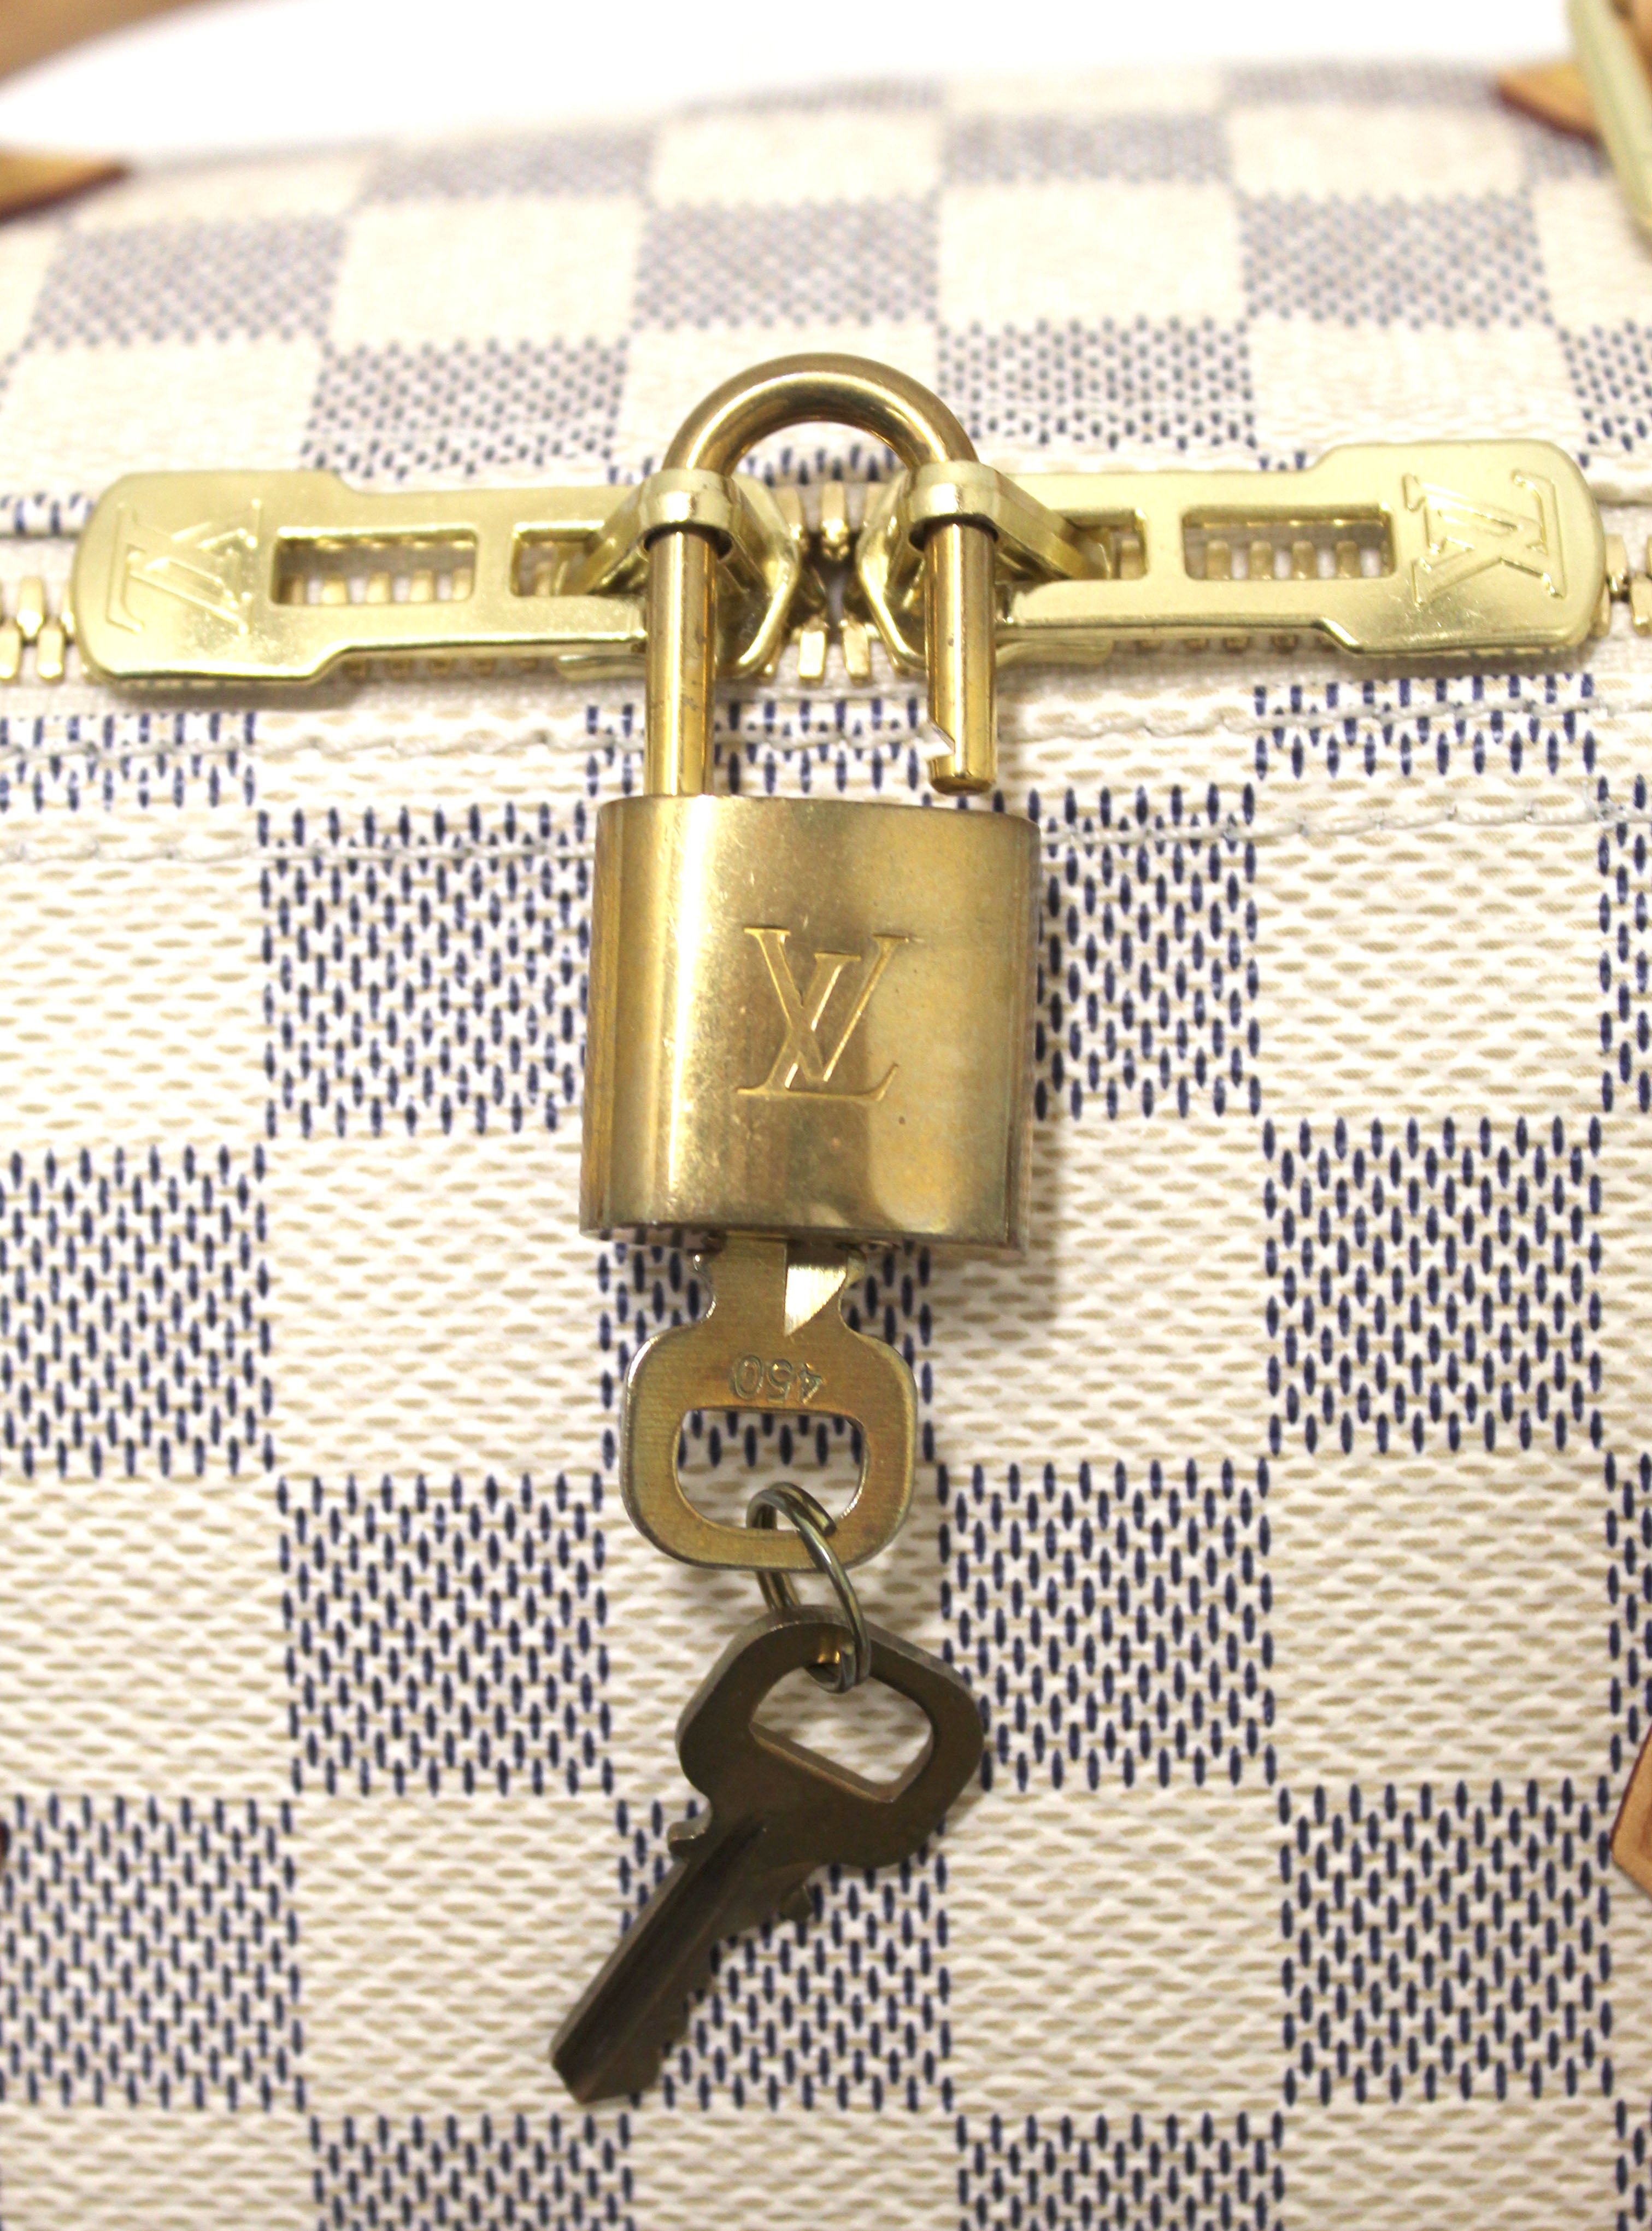 How to easily clean your Tarnish Louis Vuitton lock and key